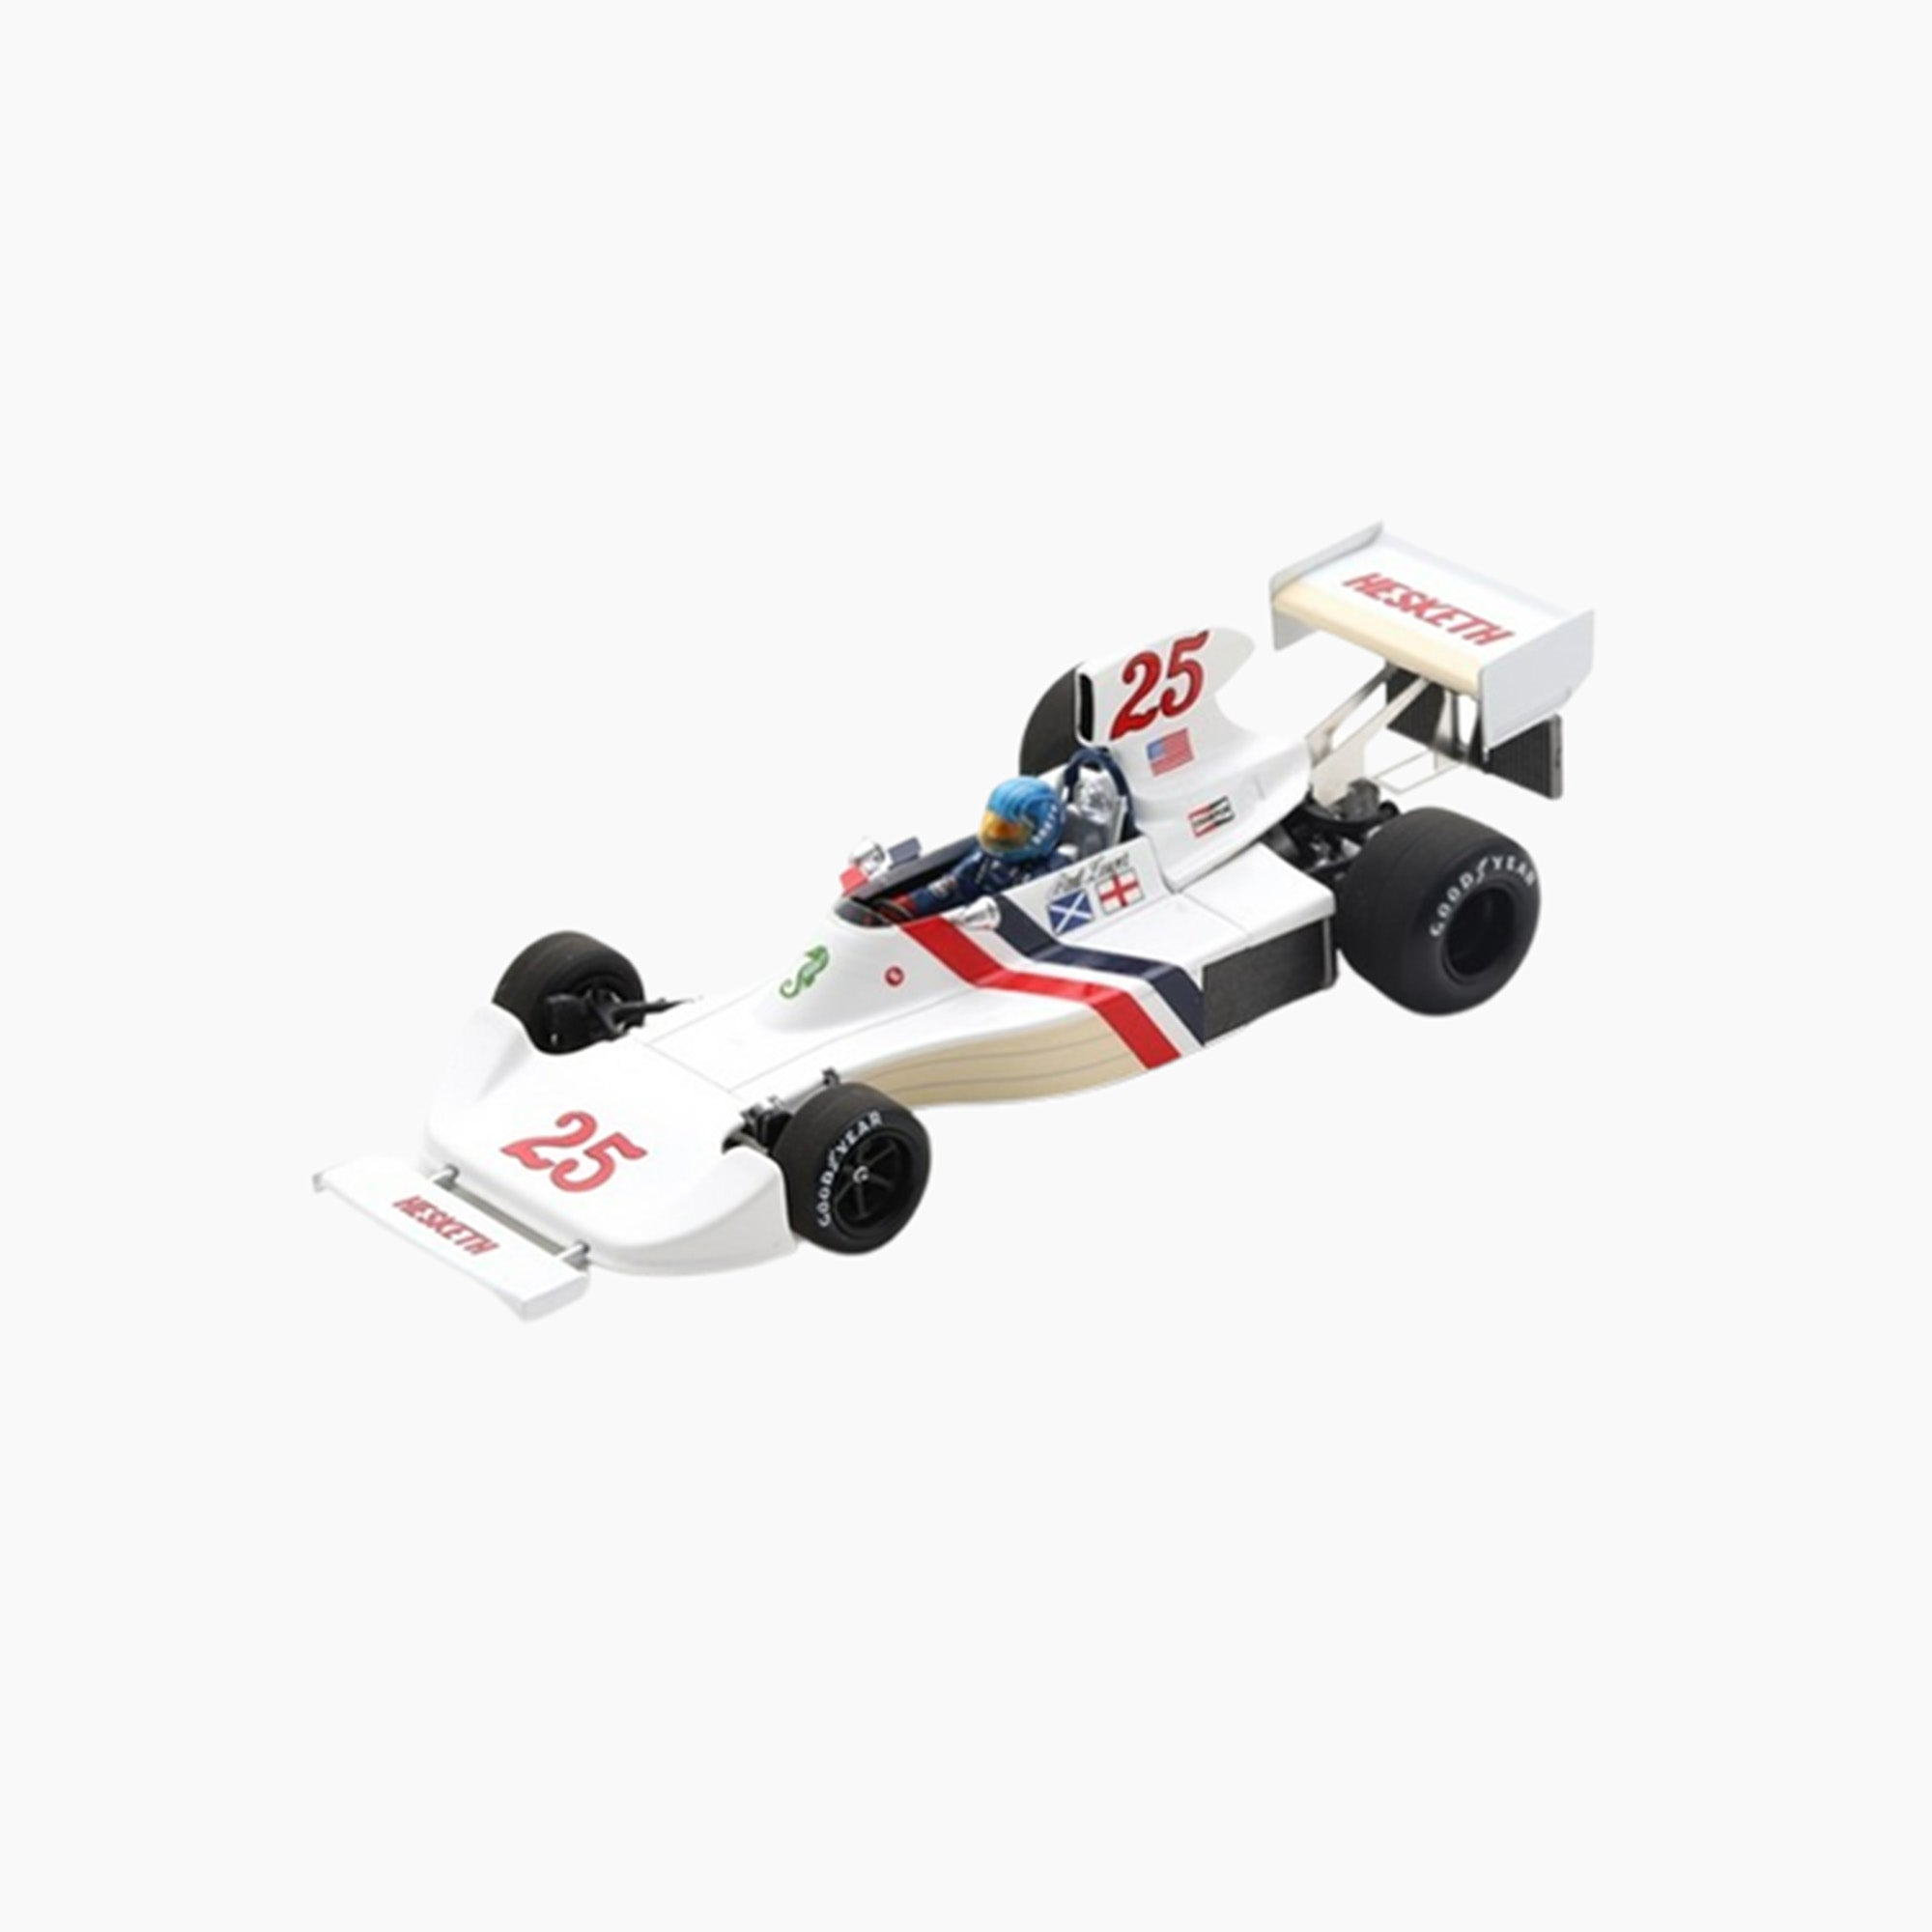 Hesketh 308 US GP 1975 | 1:43 Scale Model-1:43 Scale Model-Spark Models-gpx-store